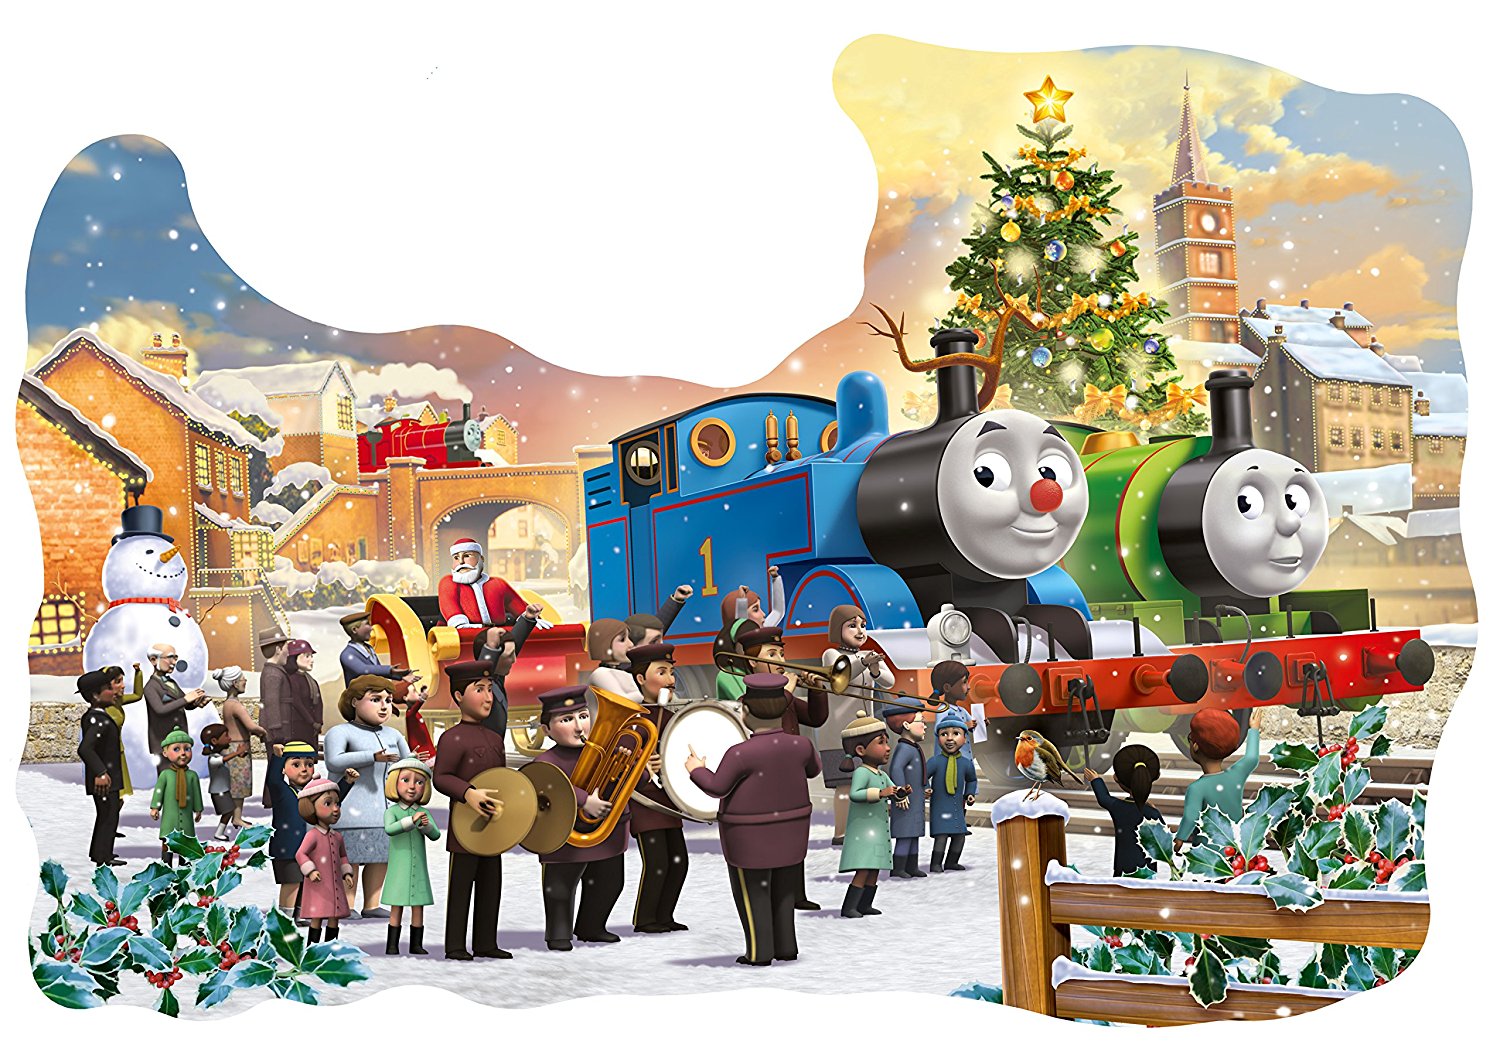 Thomas & Friends Shaped Christmas 32 Piece Jigsaw Puzzle Game